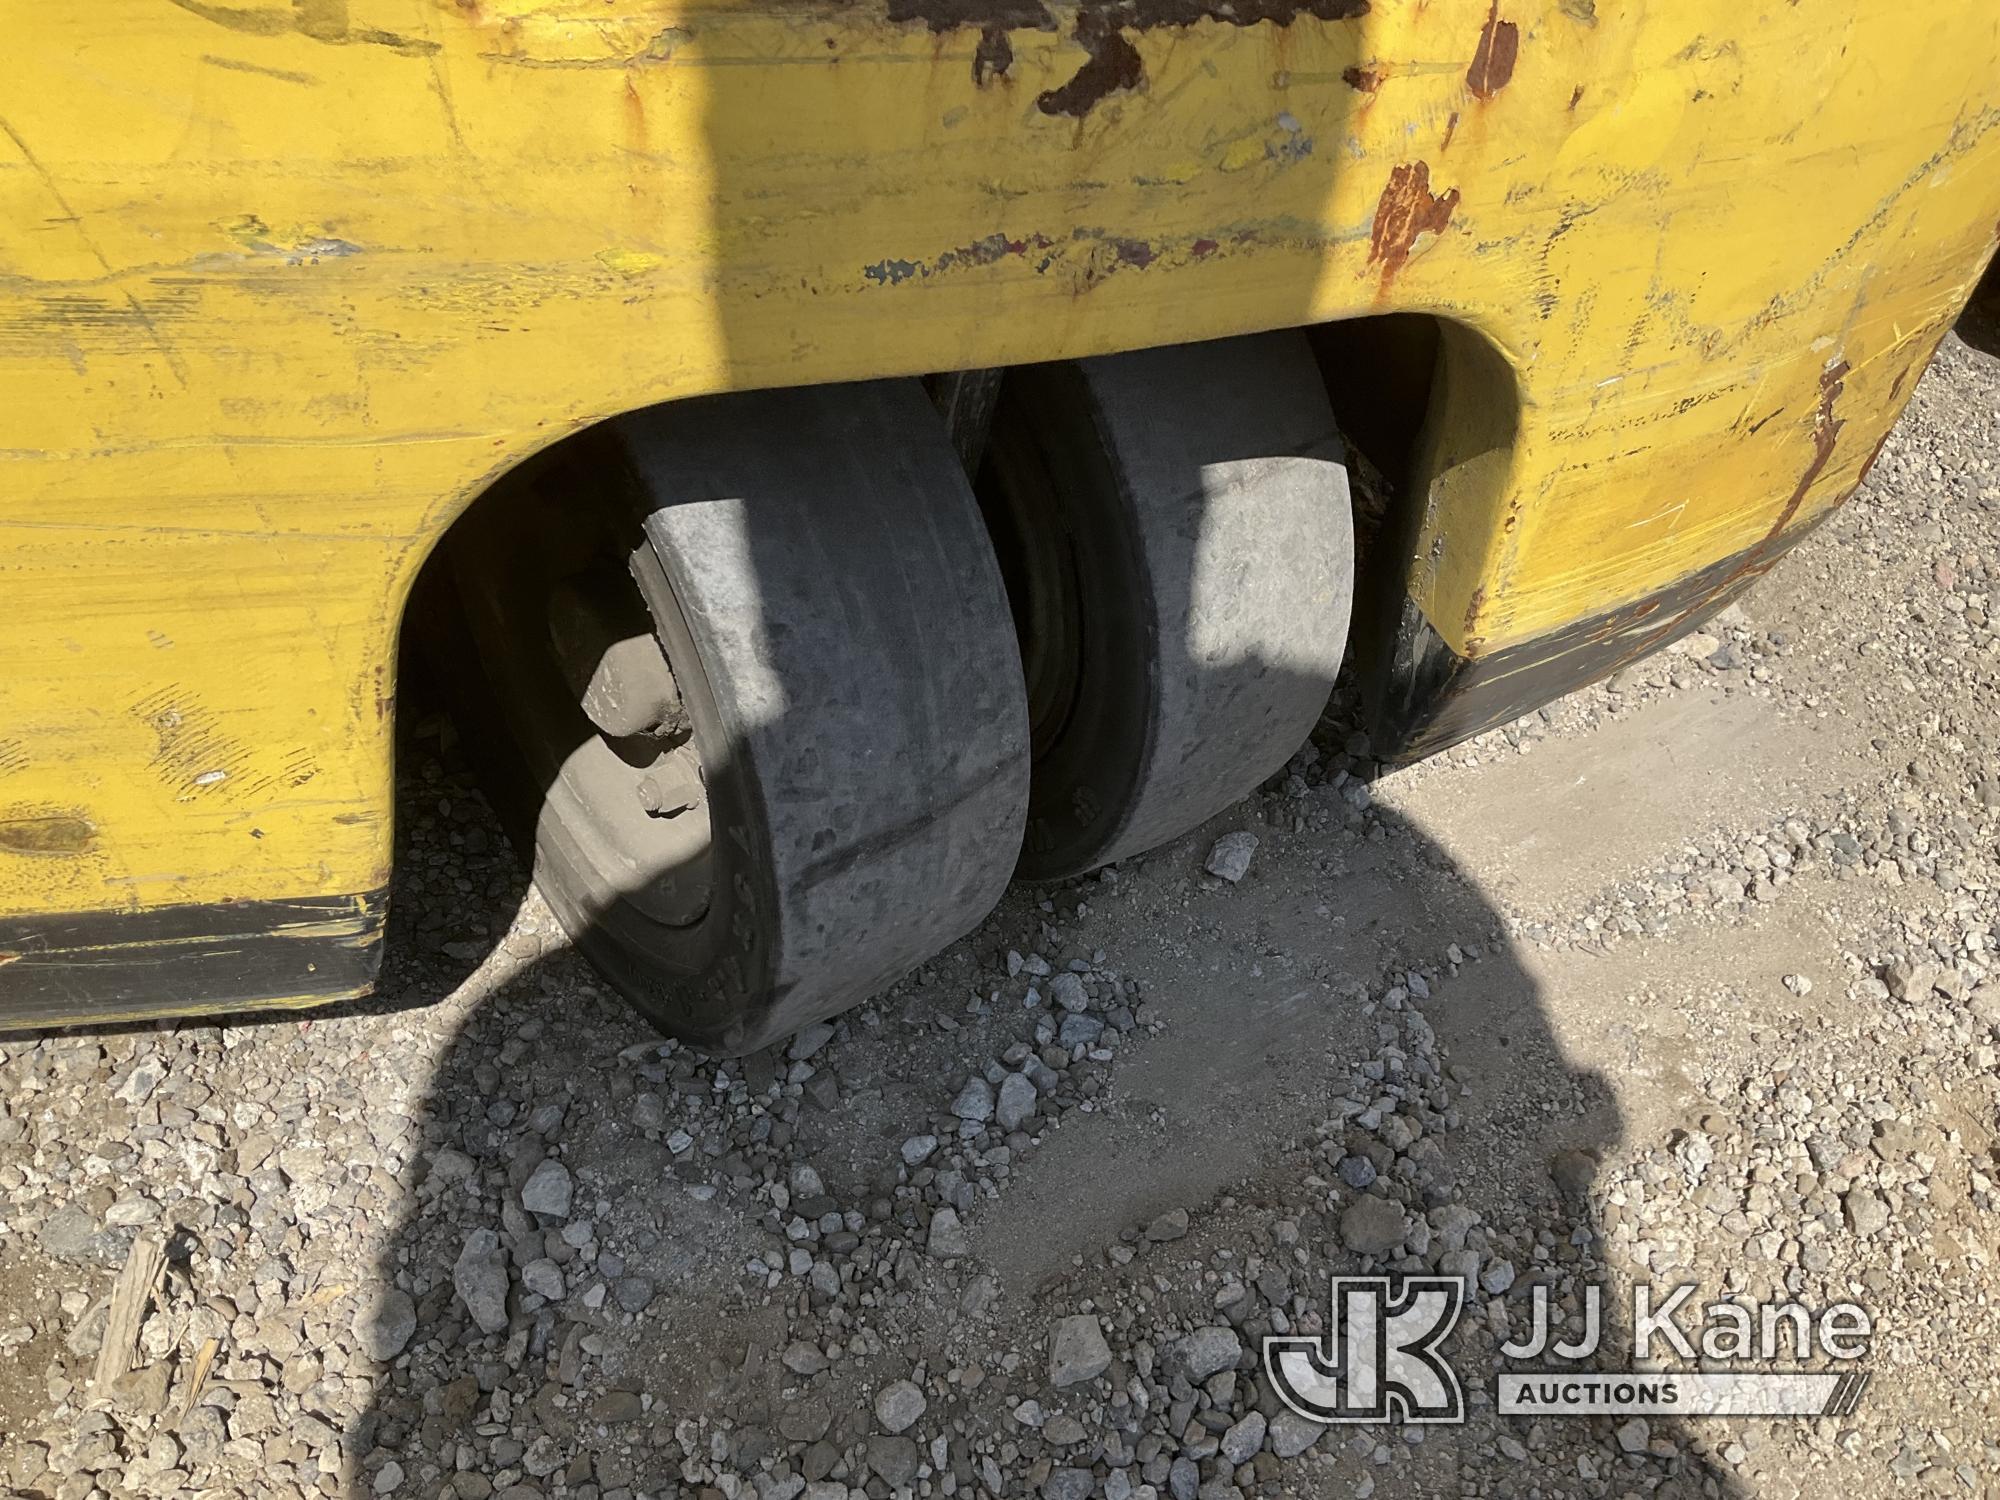 (Jurupa Valley, CA) 2008 Hyster J40ZT EV Solid Tired Forklift Starts Does Not Operate